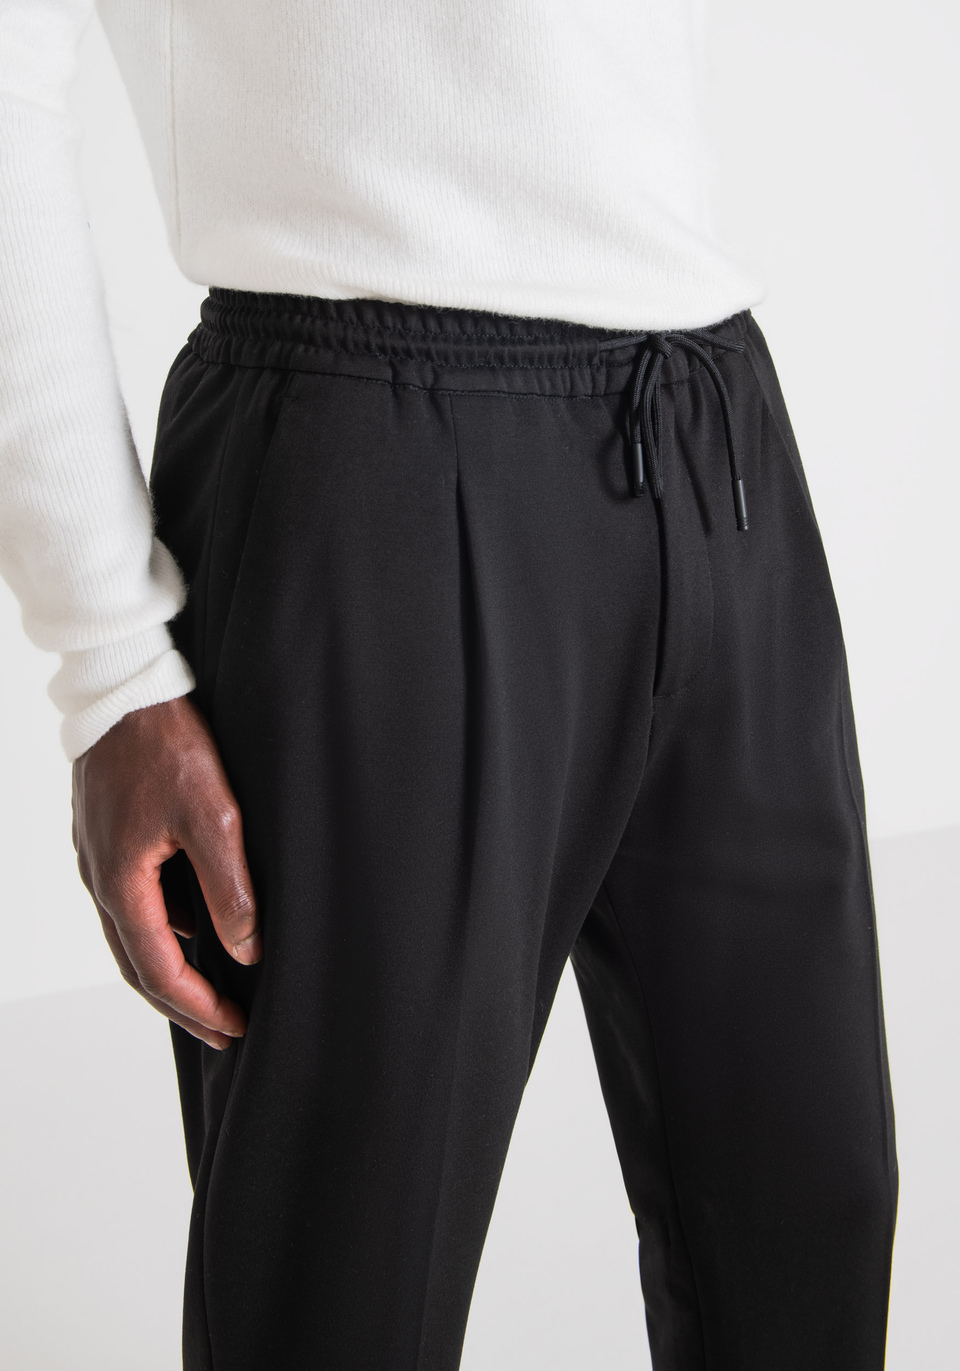 "NEI" REGULAR-FIT TROUSERS WITH ELASTIC AND DRAWSTRING - Antony Morato Online Shop